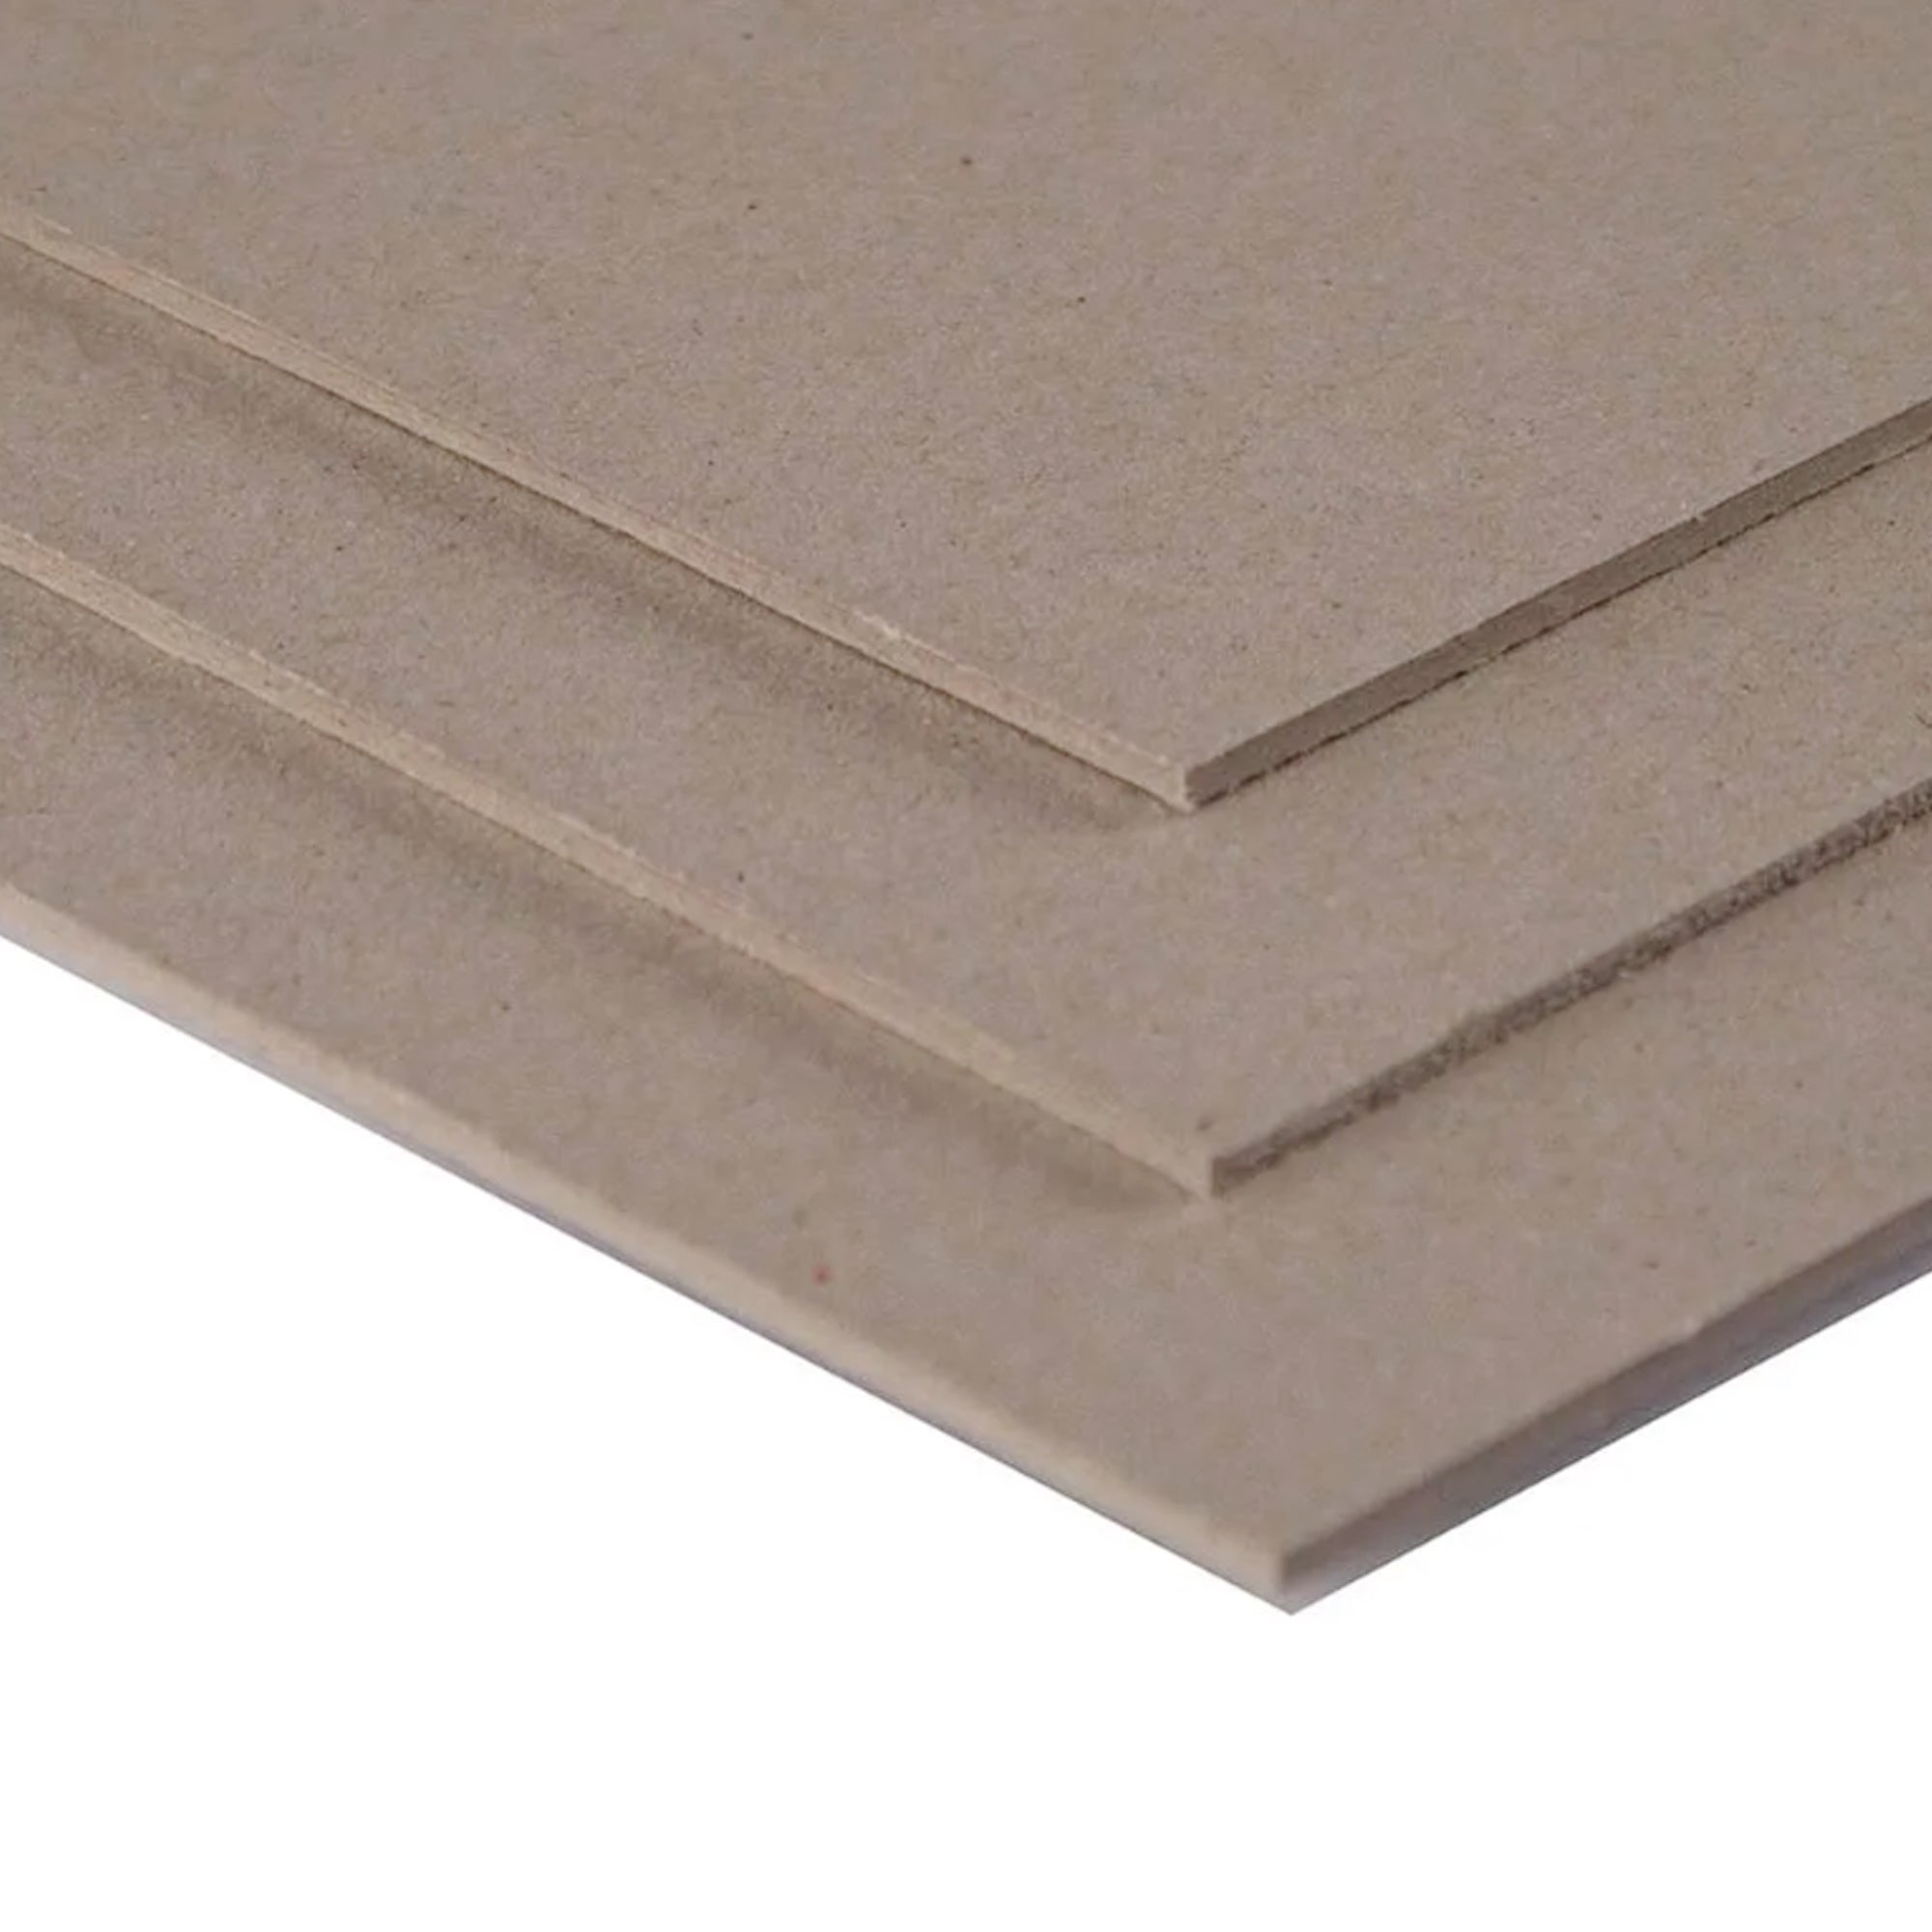 Seawhite Greyboard A2+ - 2mm Thick - 25 Sheet Pack